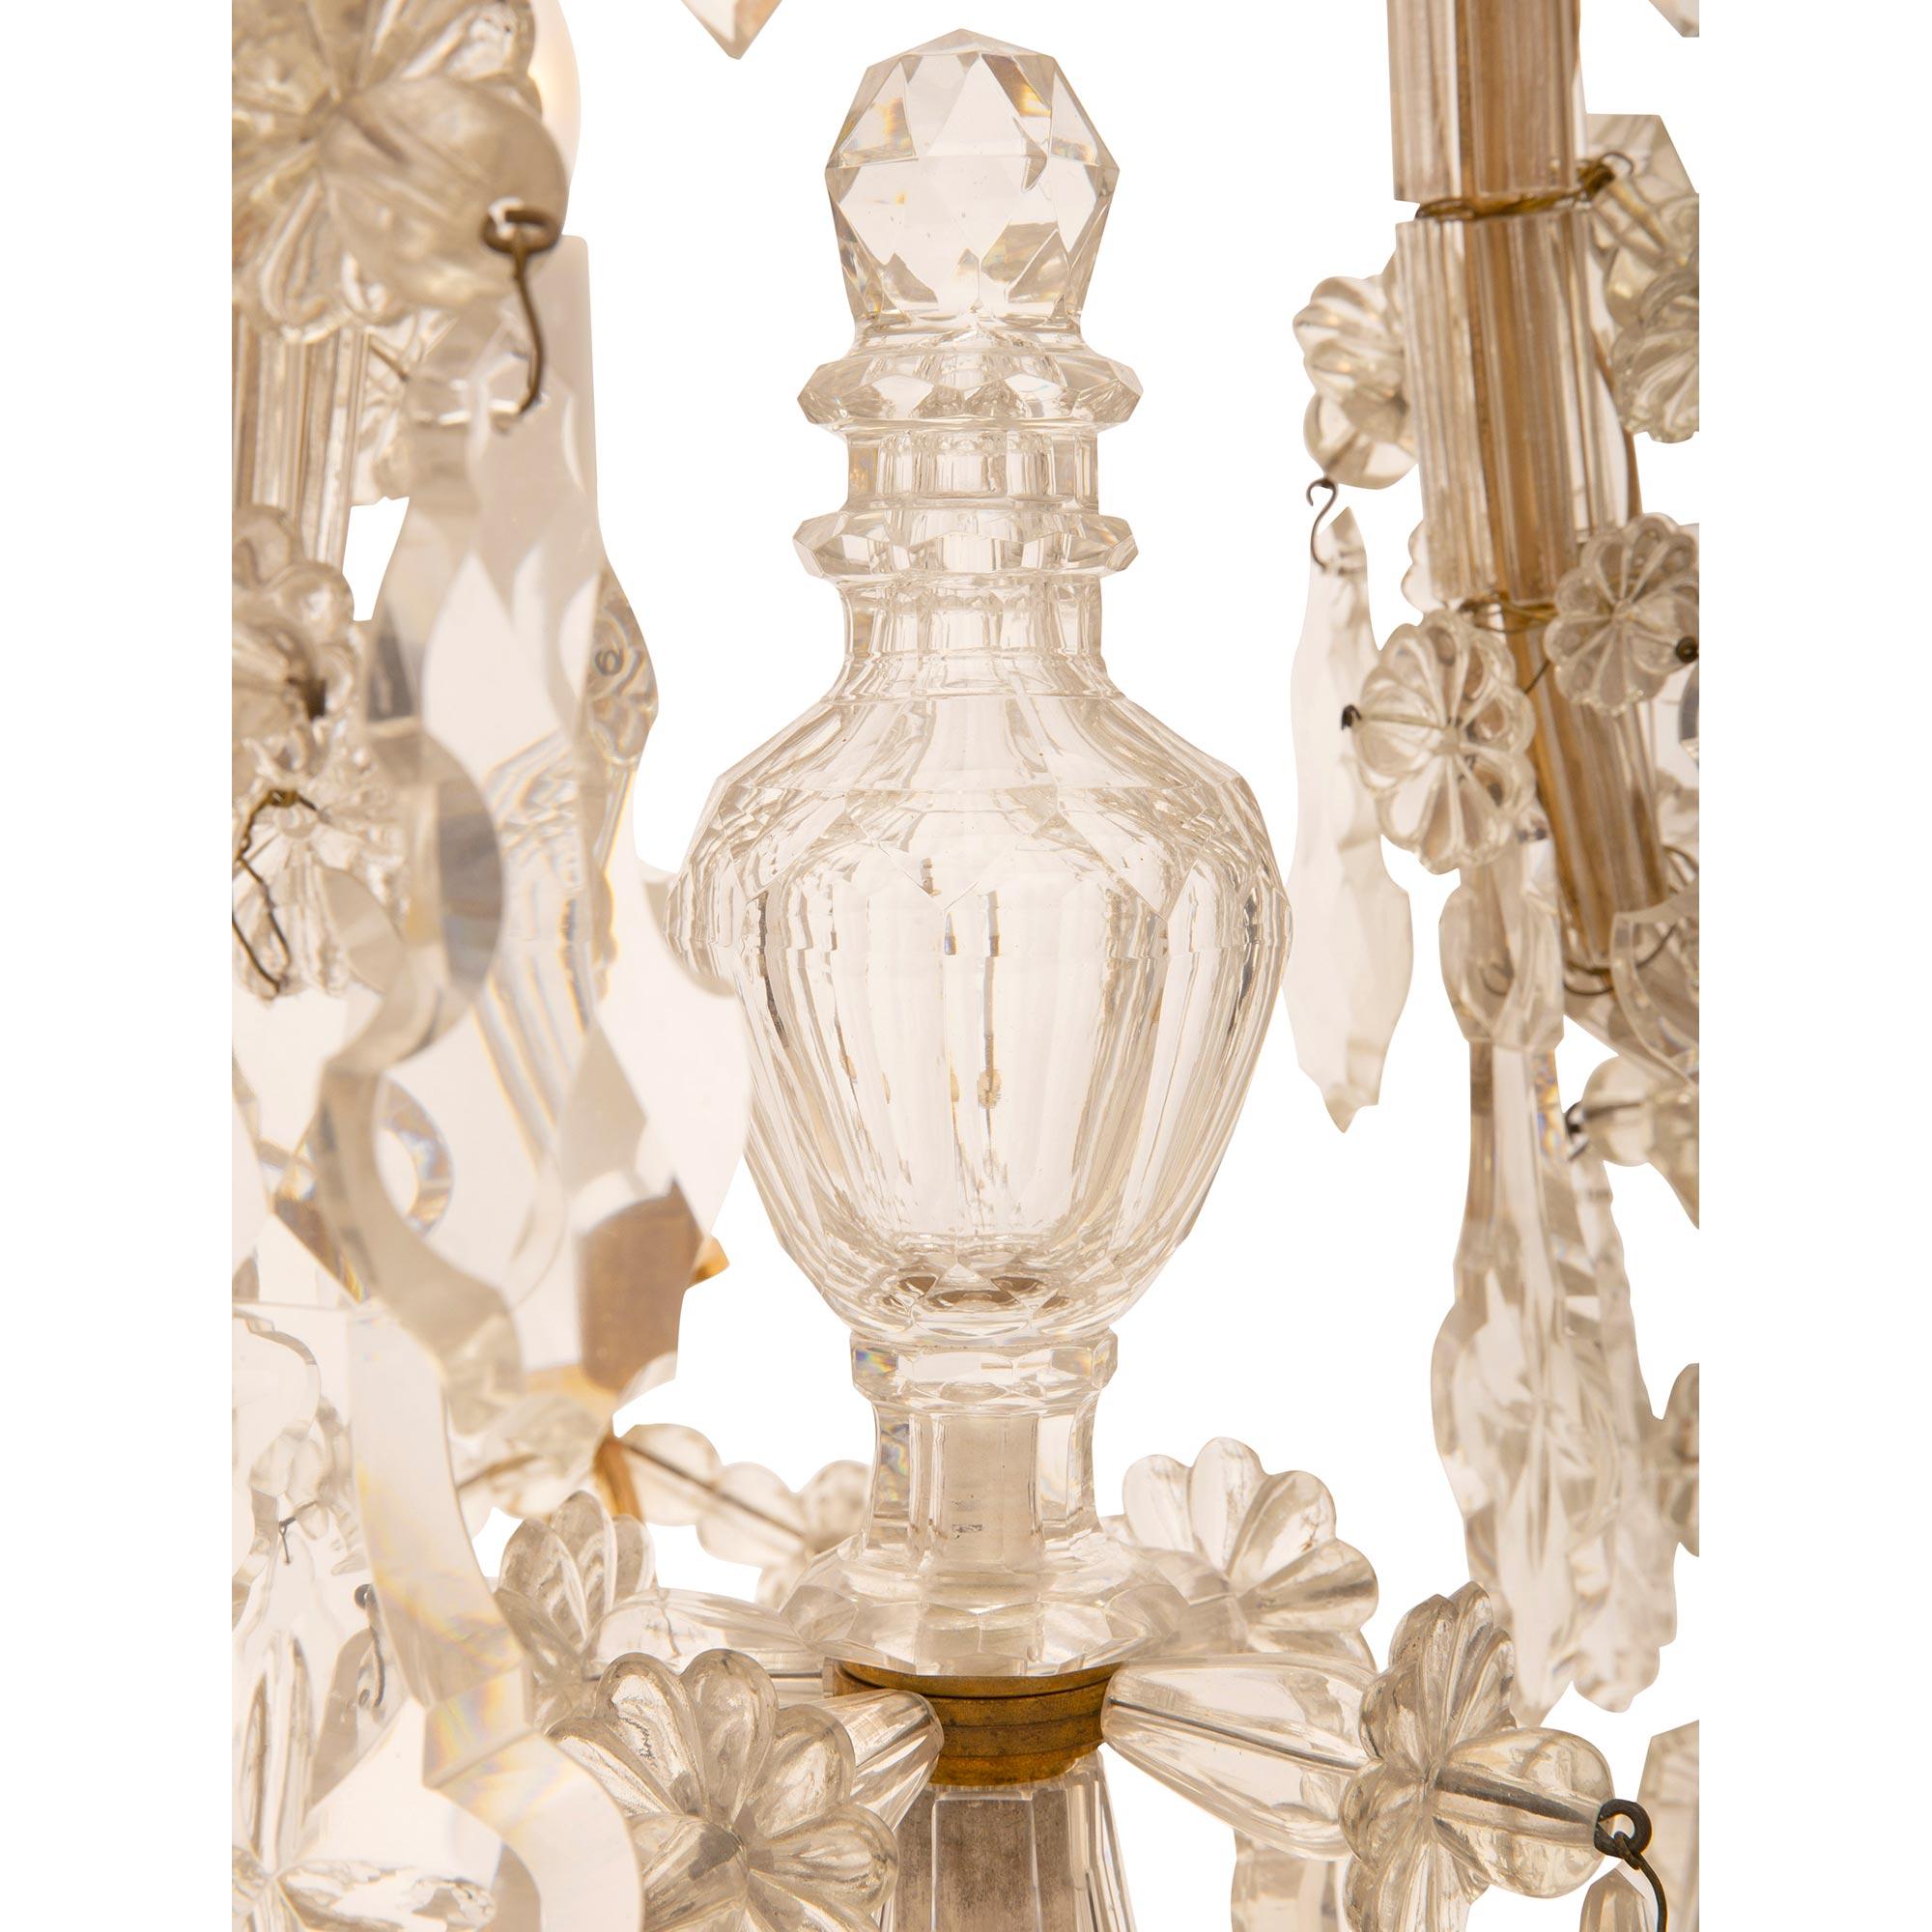 French Mid-19th Century Louis XV Style Ormolu and Baccarat Crystal Chandelier For Sale 1